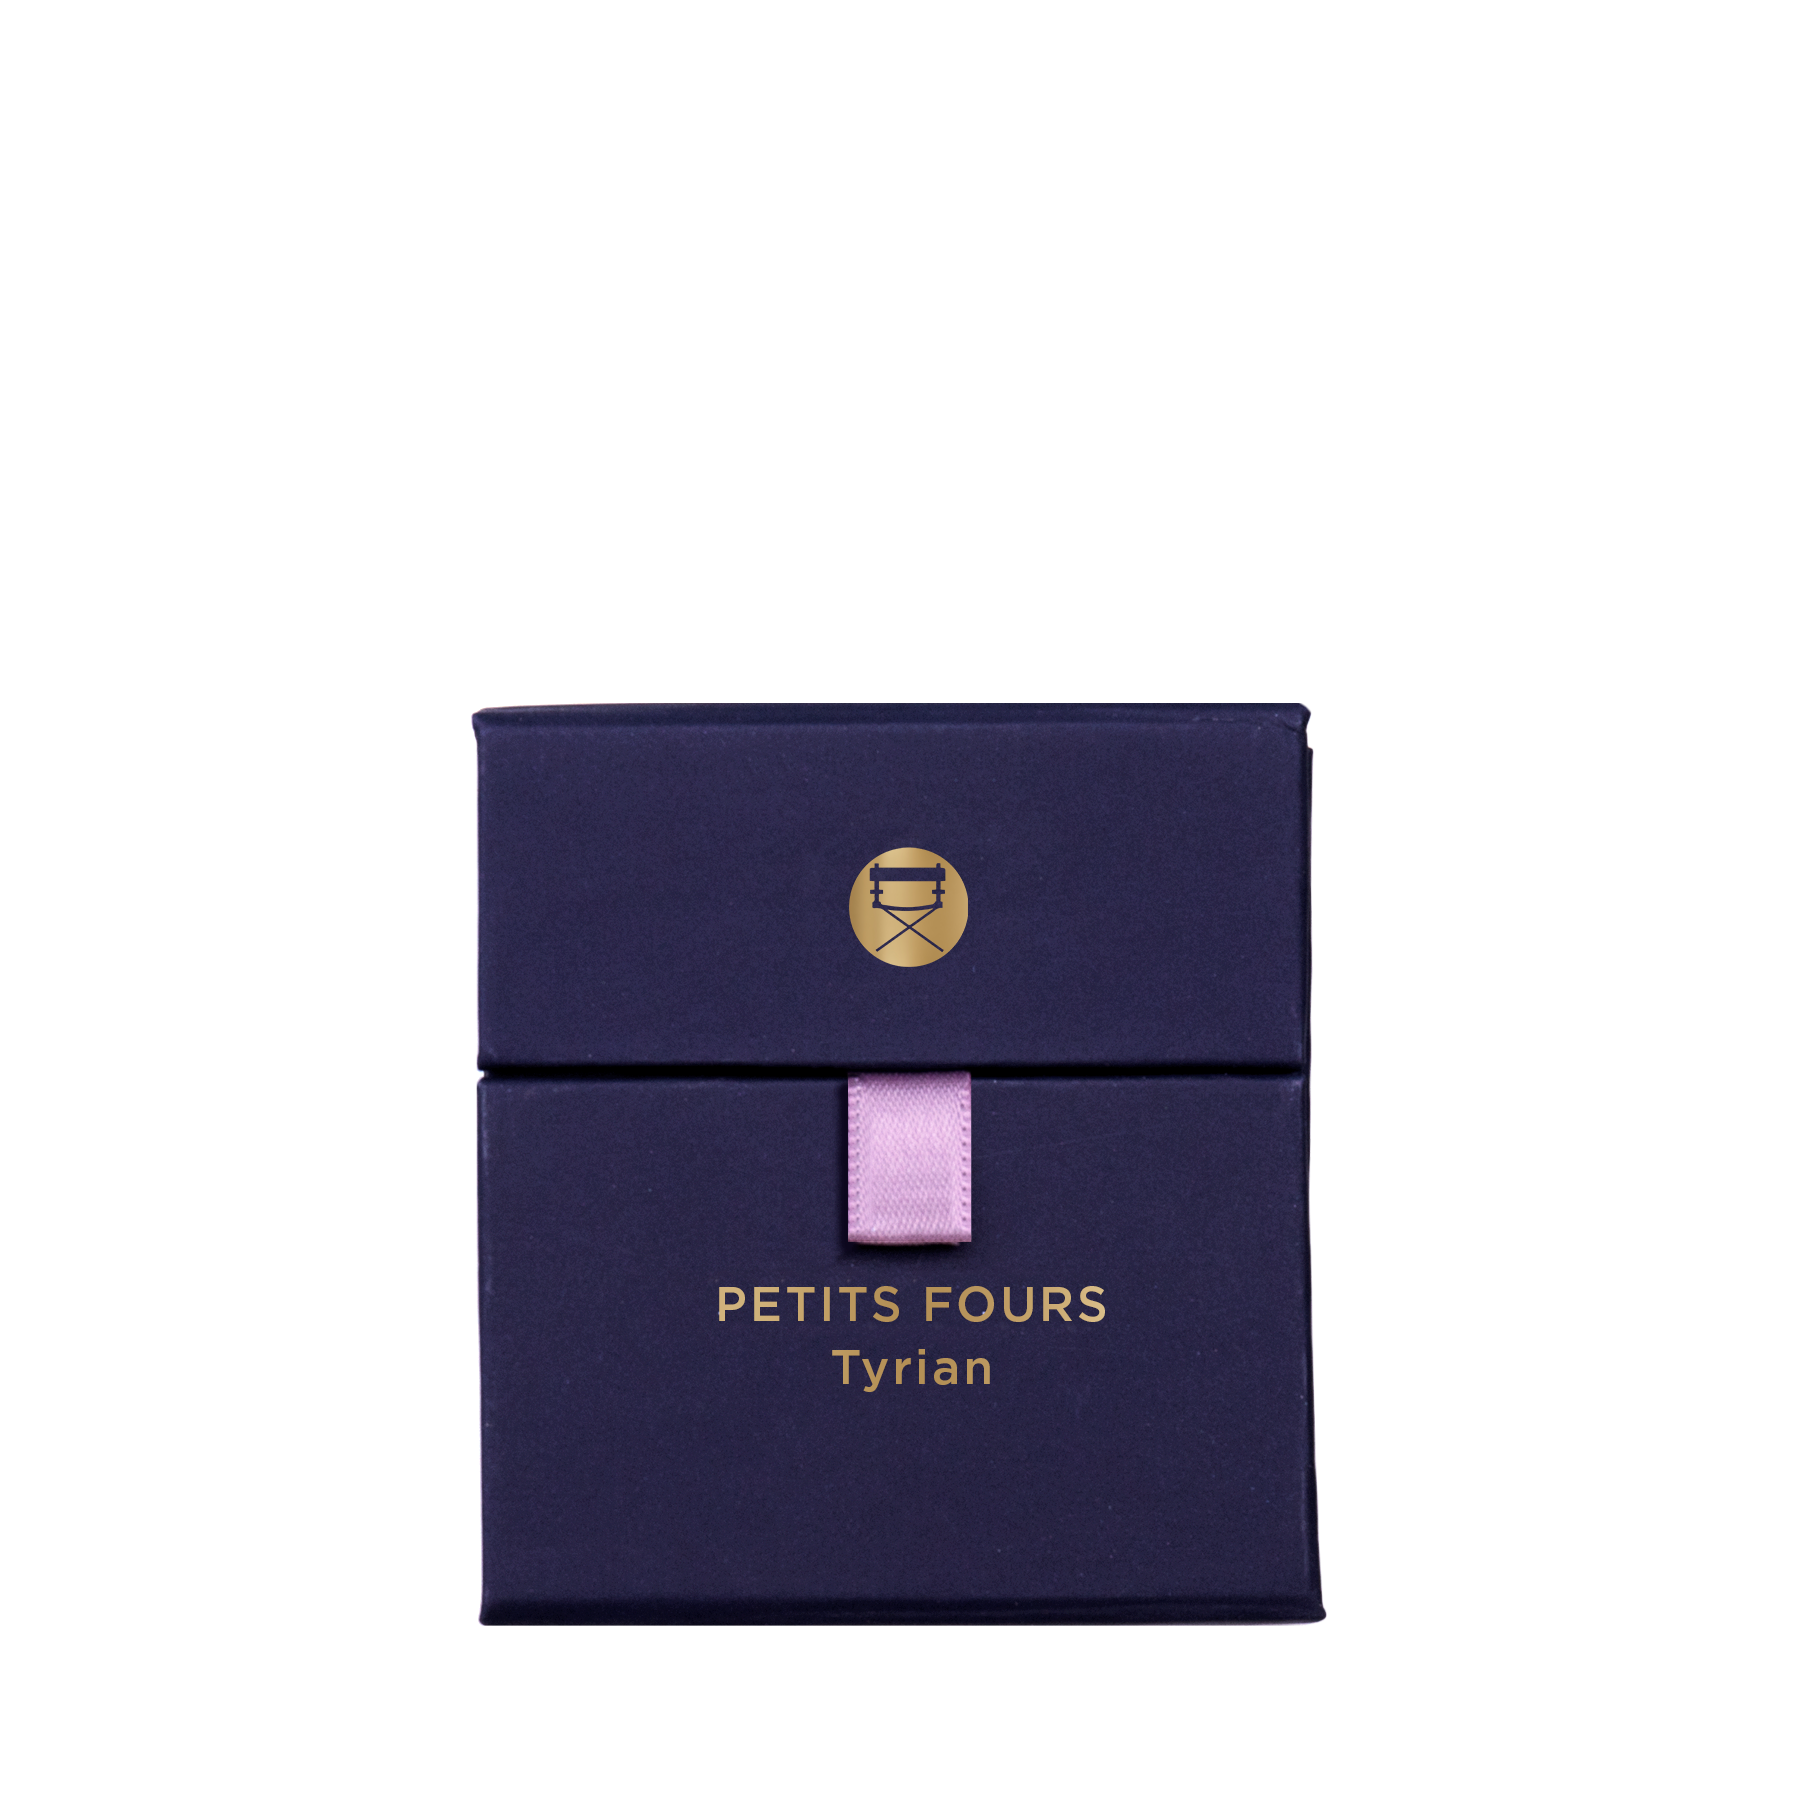 PETITS FOURS - TYRIEN